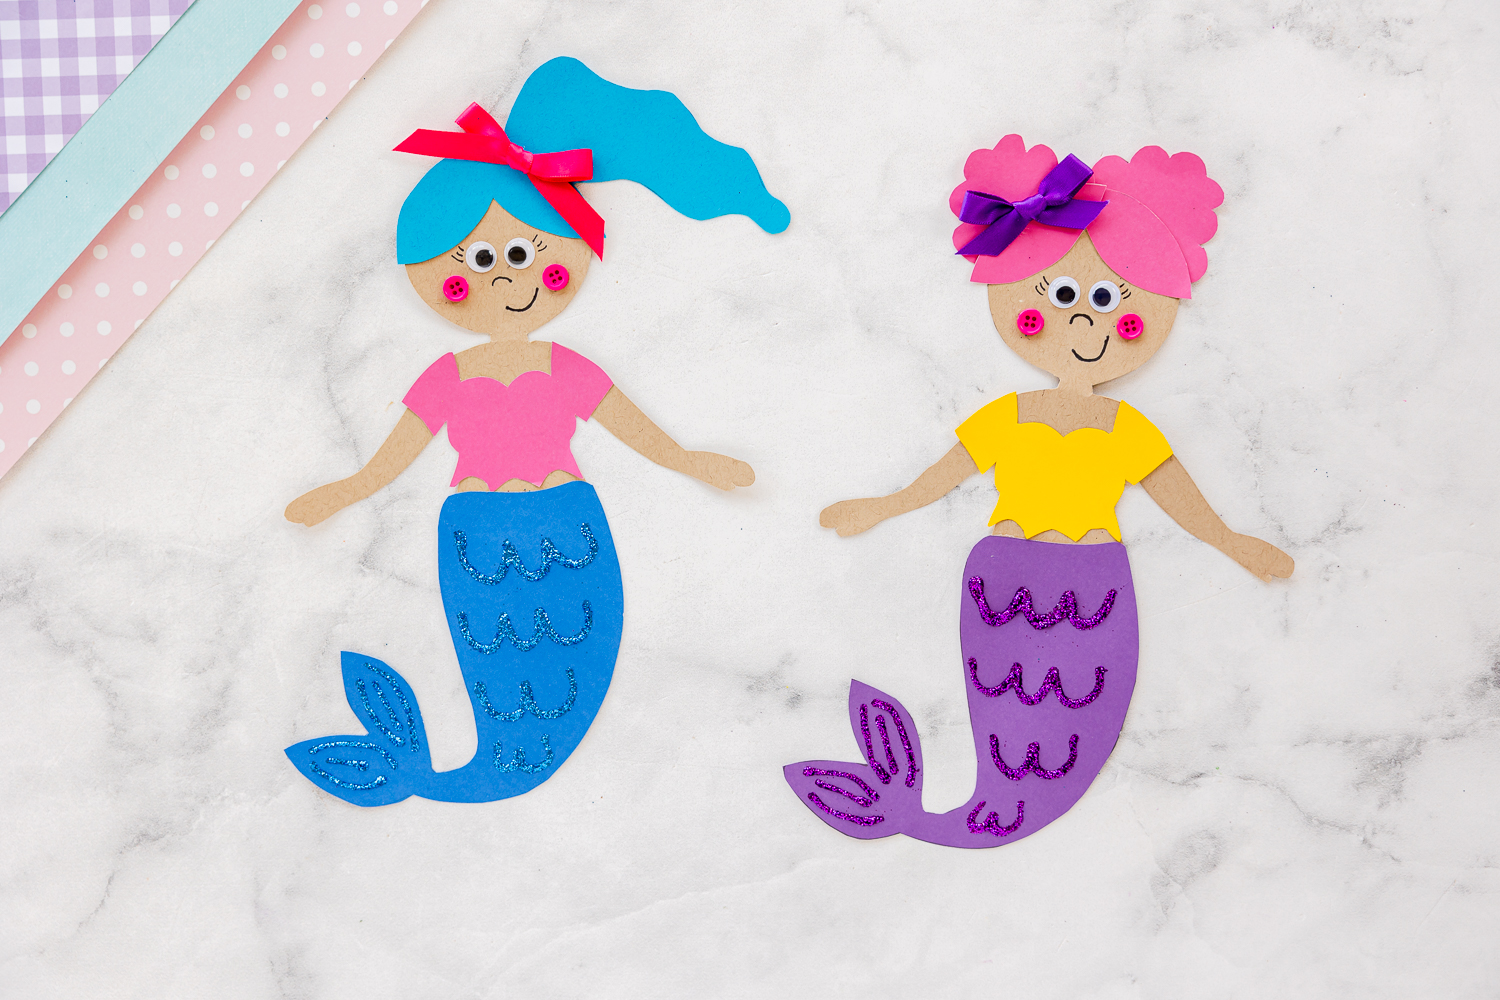 mermaid craft made out of paper